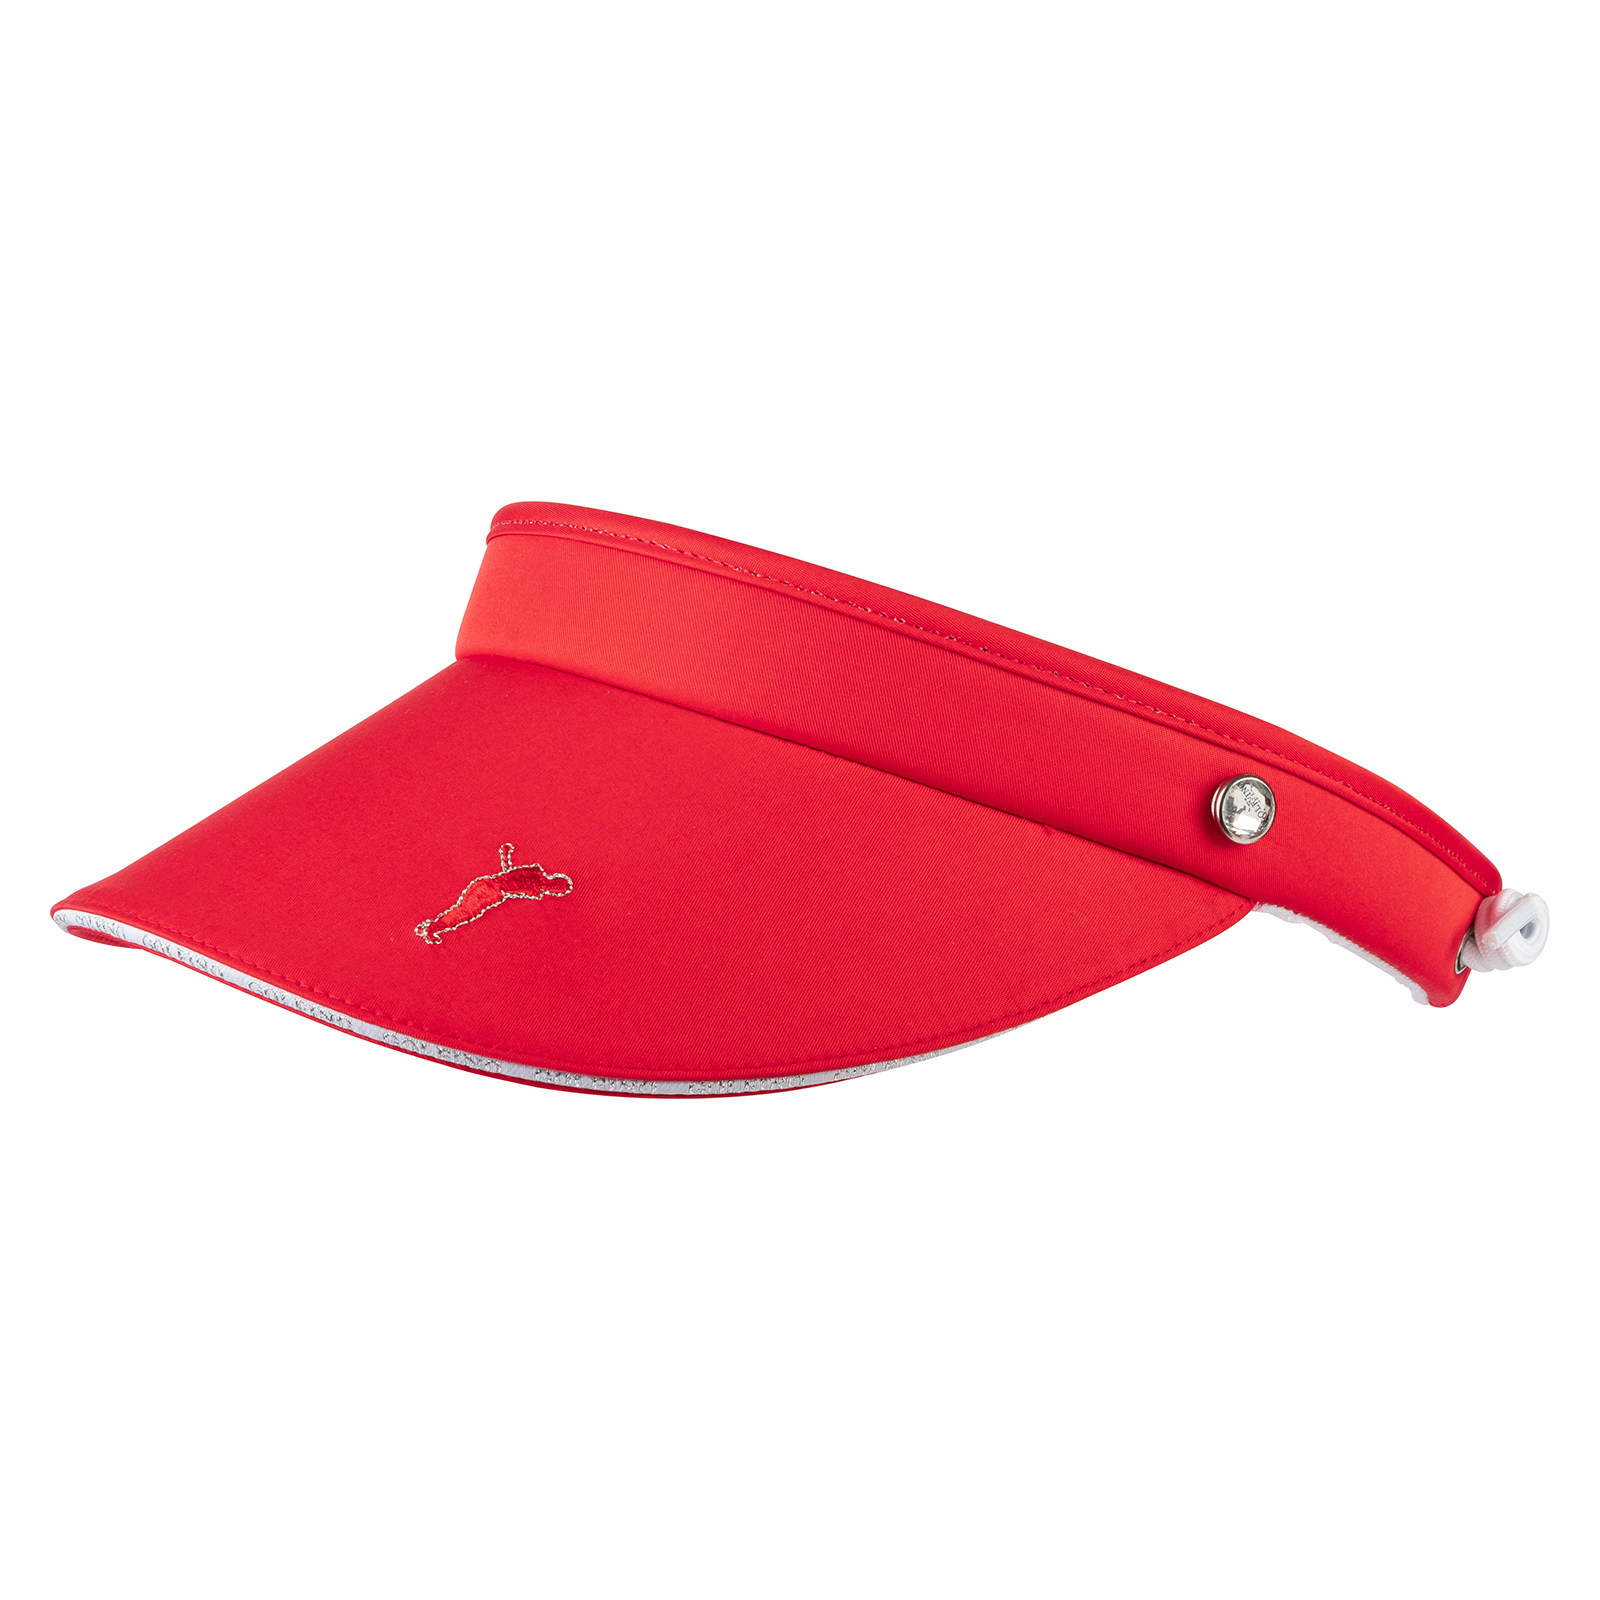 Ladies' golf visor with soft terry towelling sweatband 